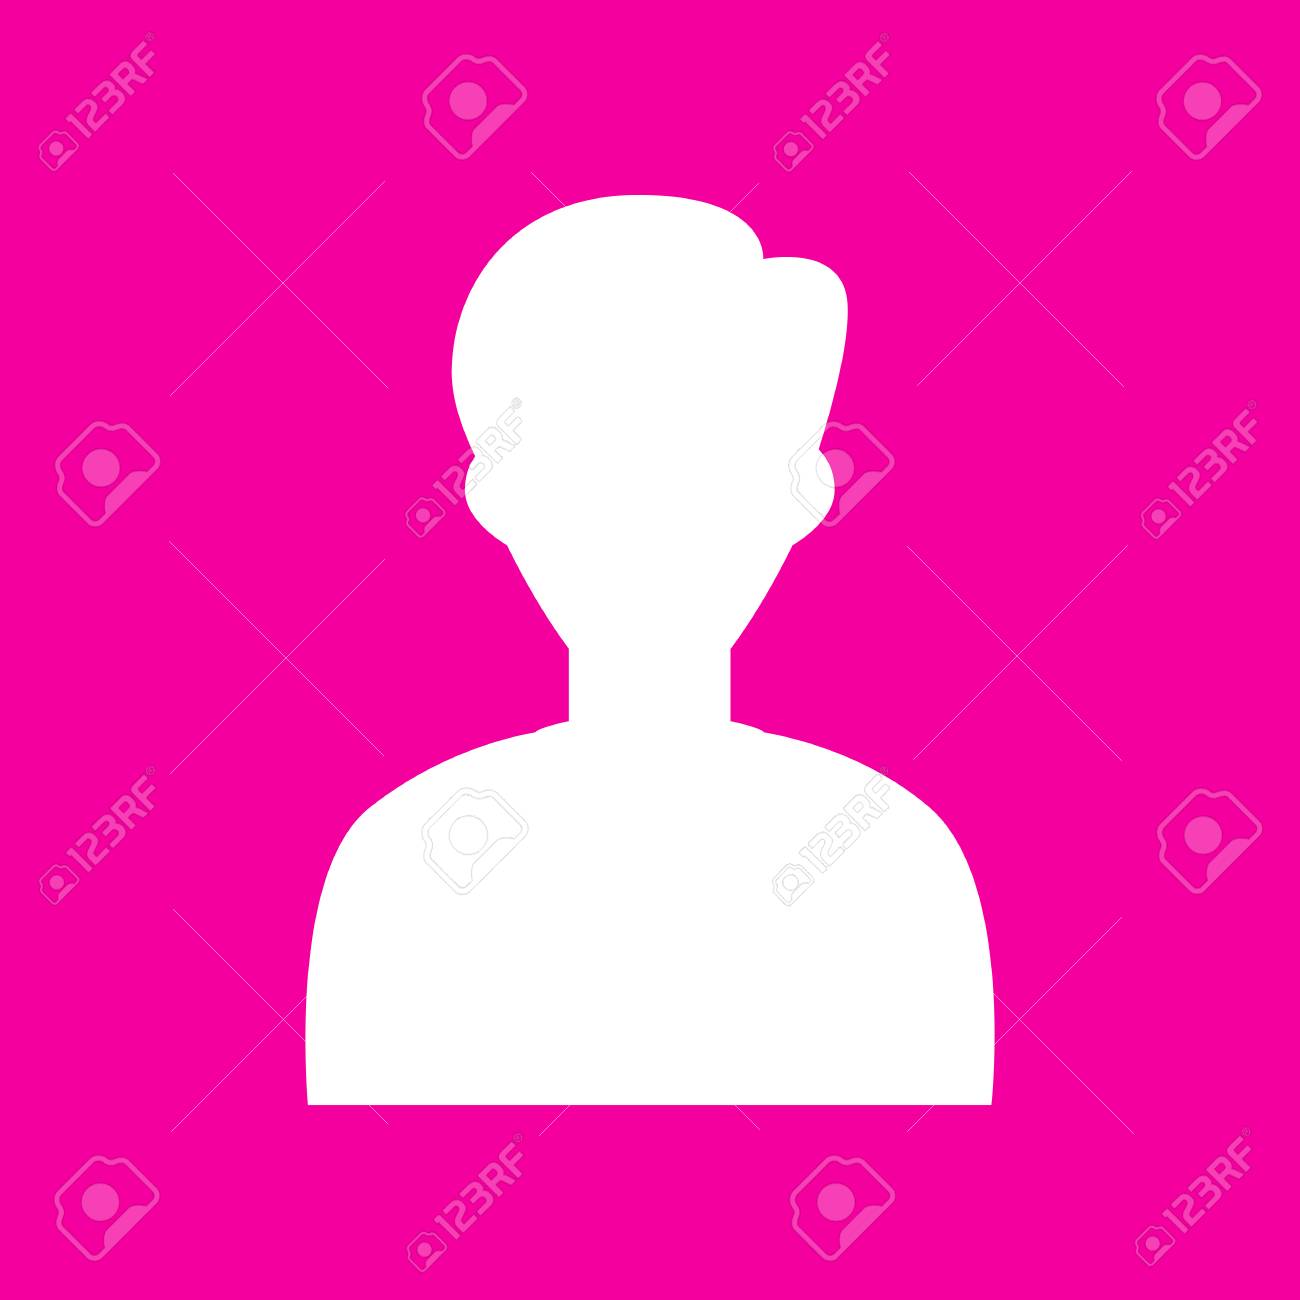 Anonymous user circle icon Royalty Free Vector Image